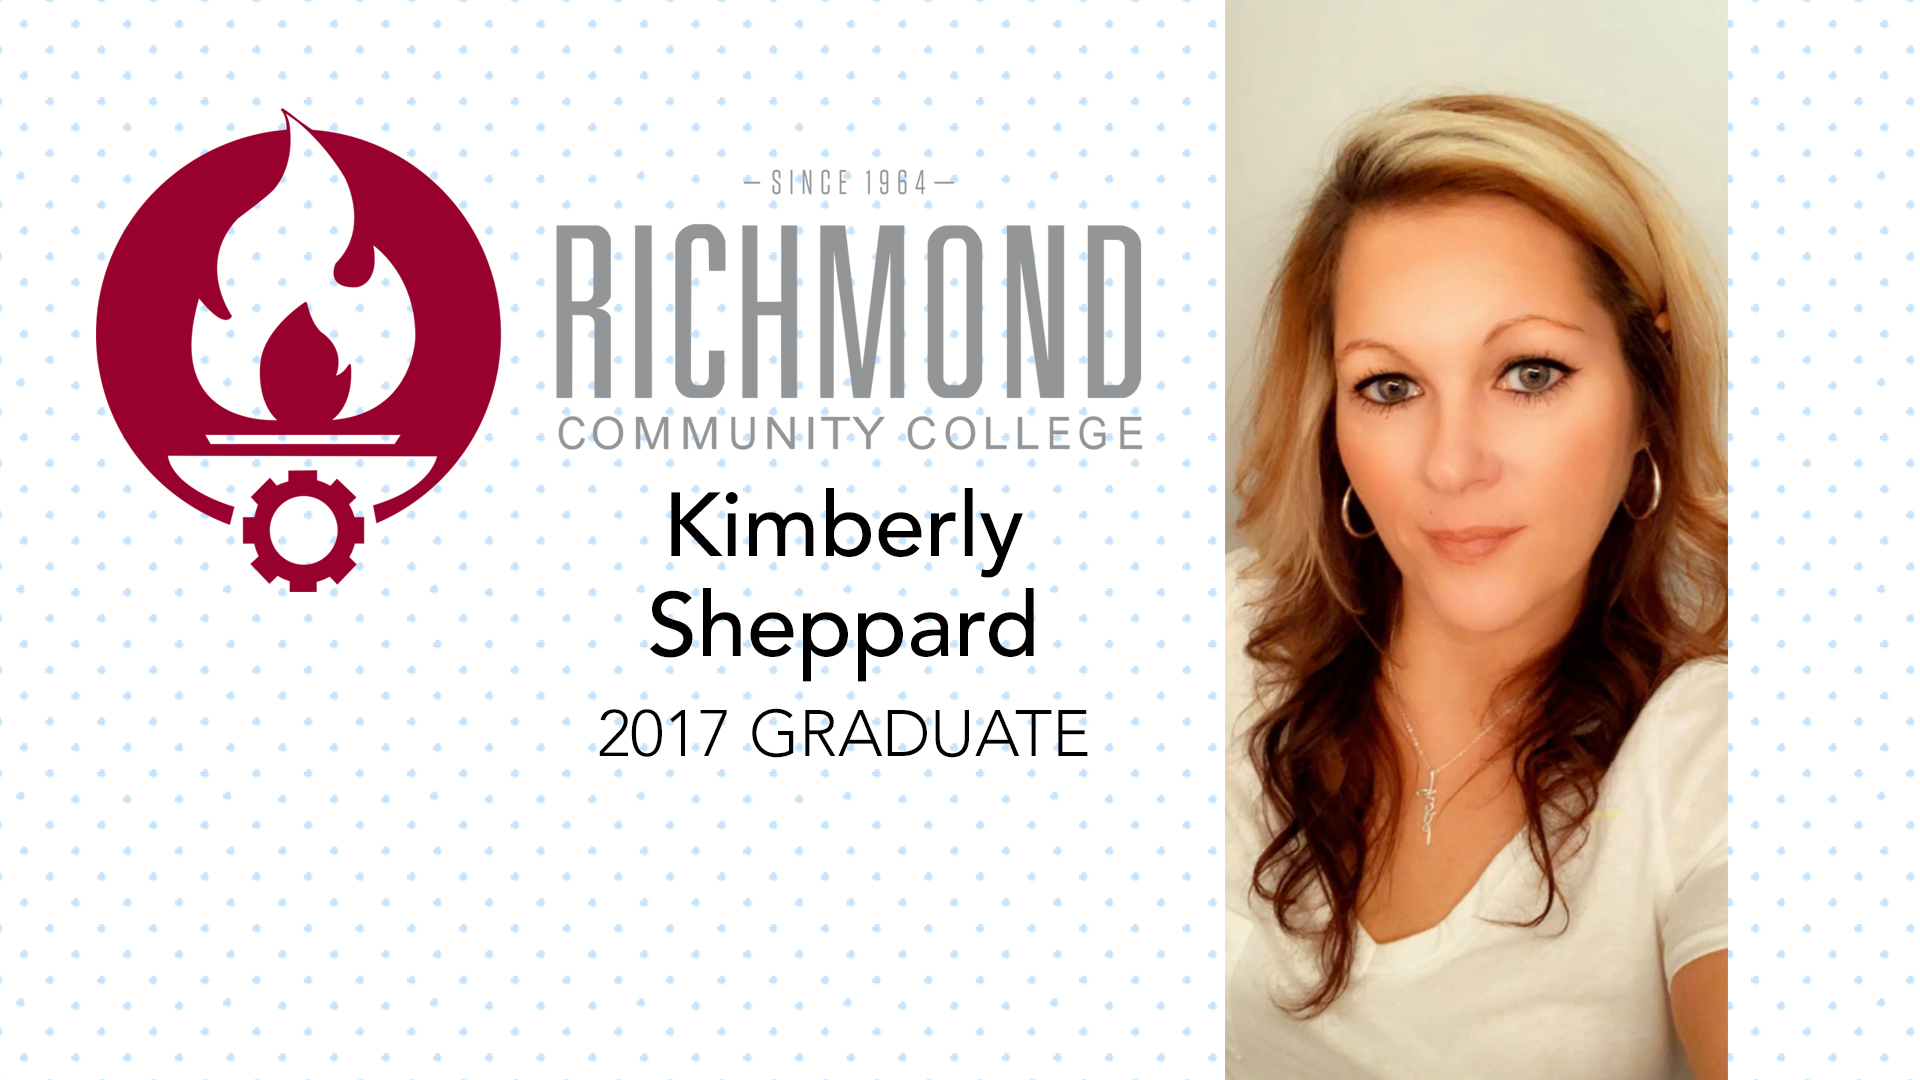 Picture of Kimberly Sheppard, 2017 graduate, with RCC logo